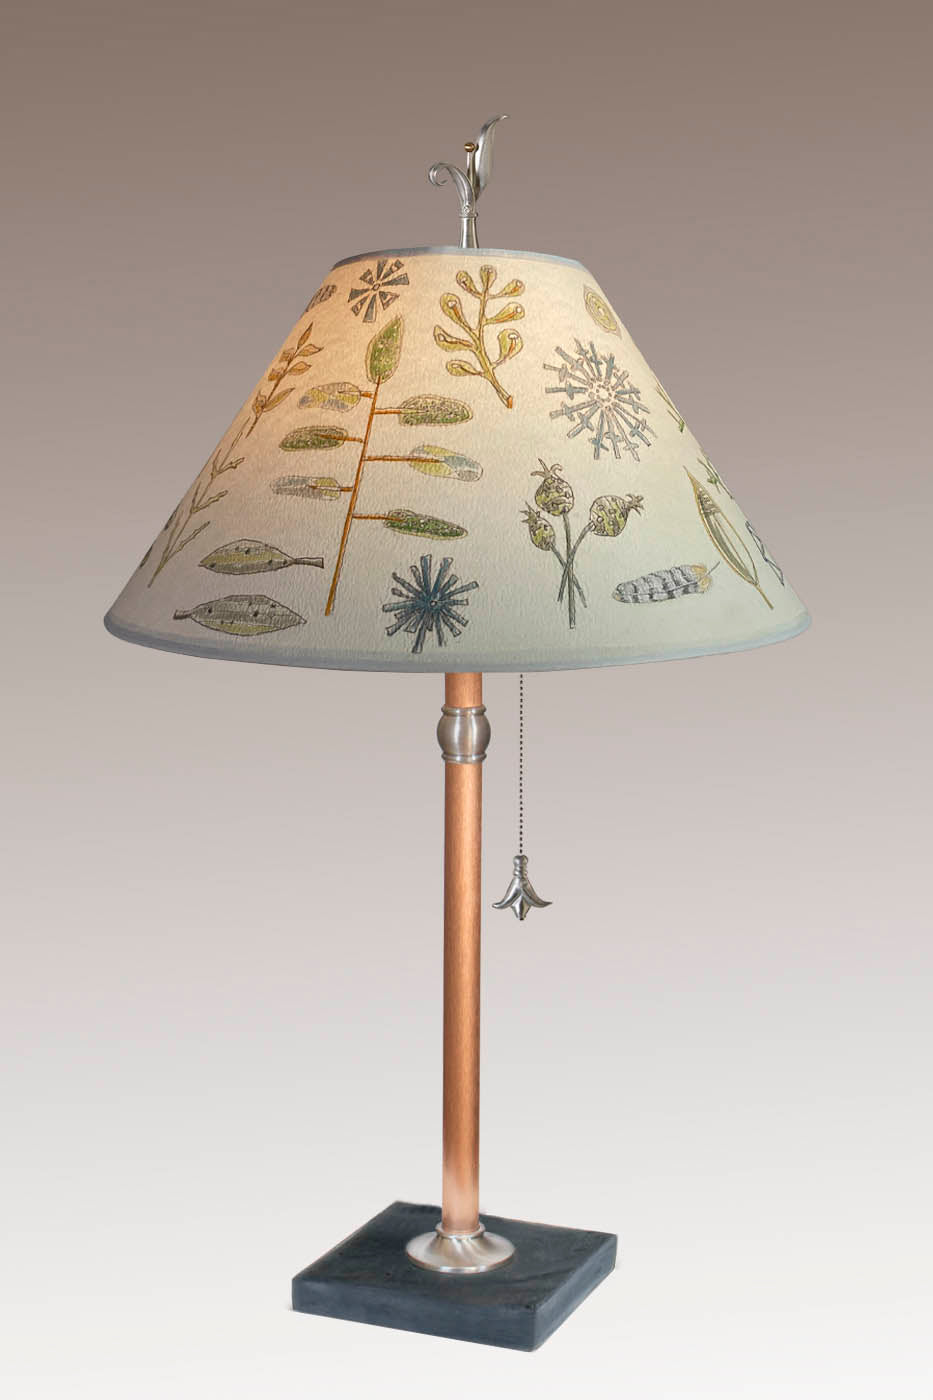 Janna Ugone &amp; Co Table Lamp Copper Table Lamp with Large Conical Shade in Field Chart